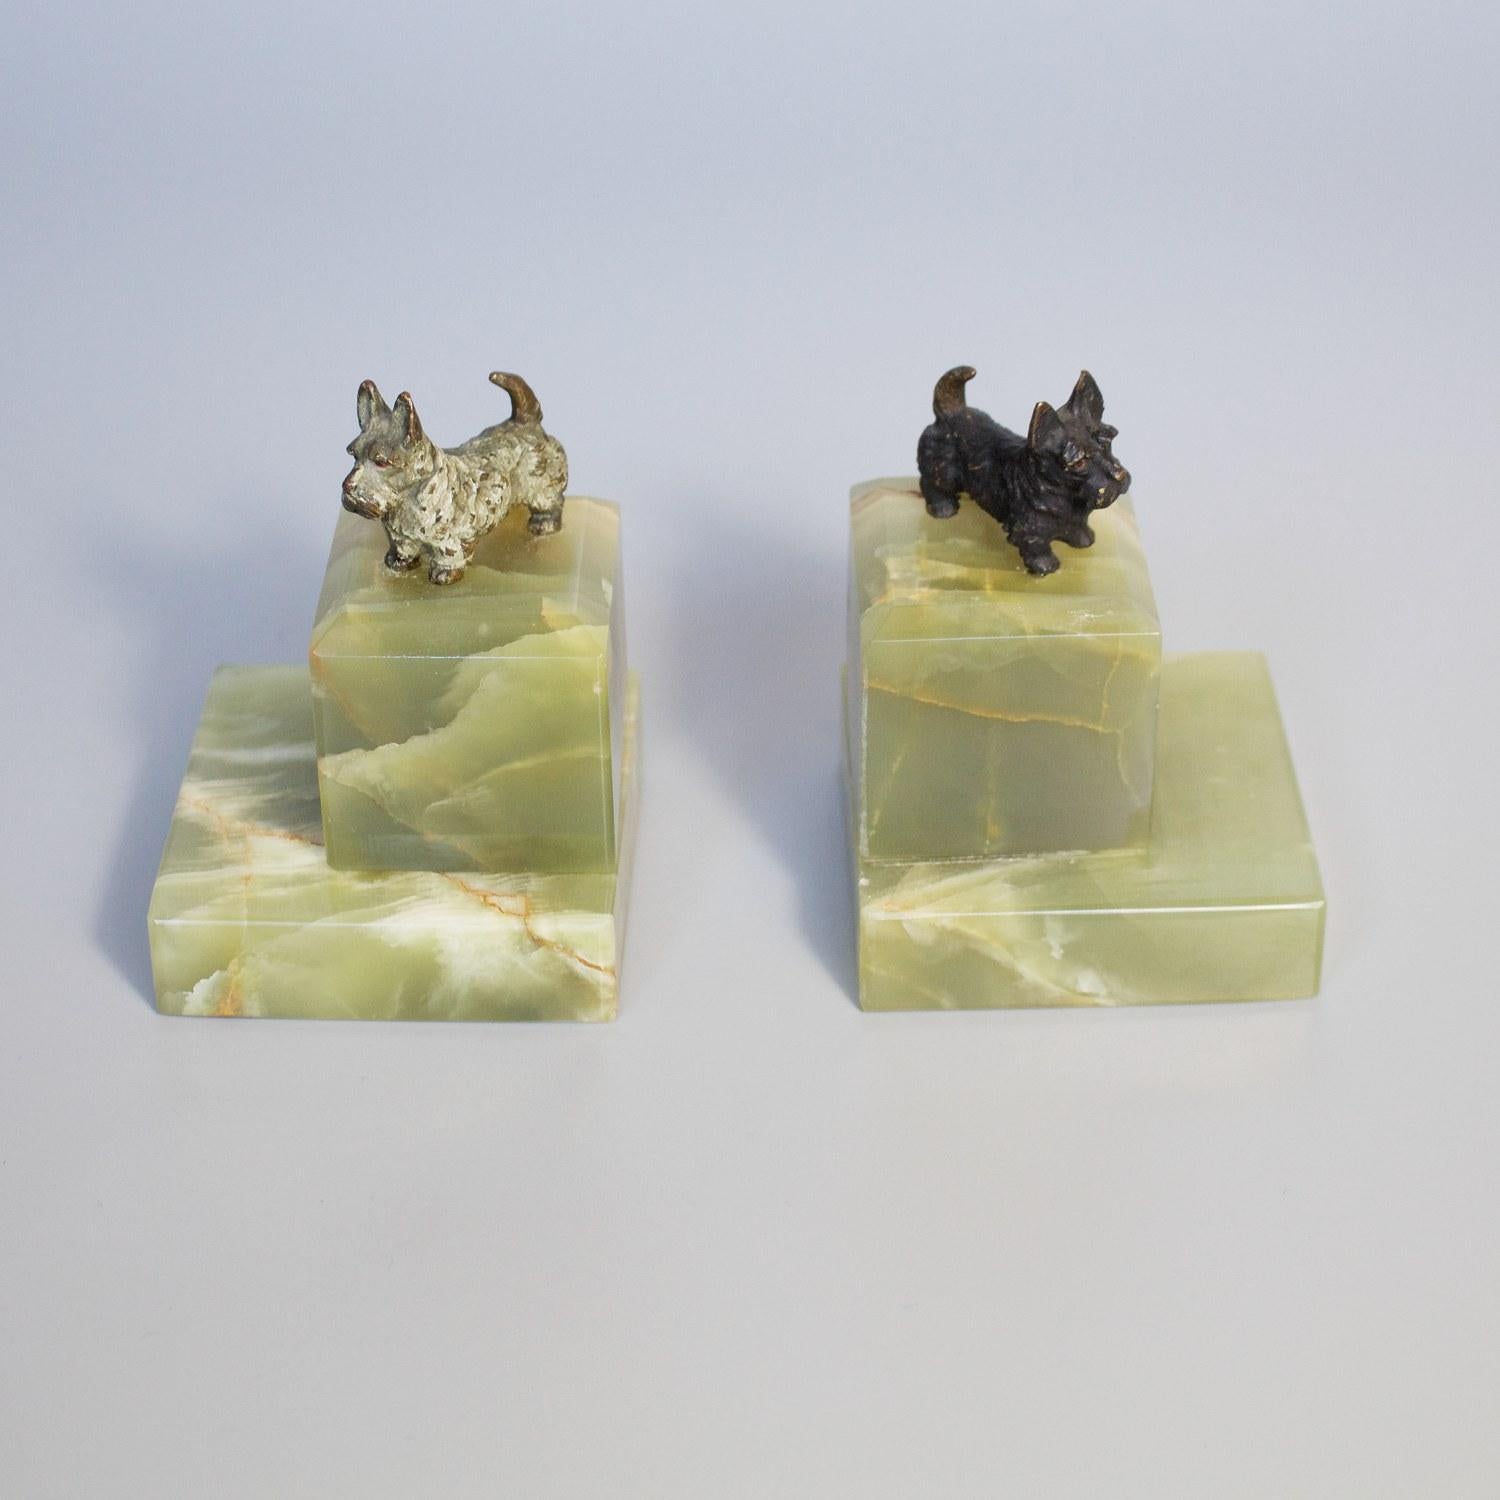 A pair of Art Deco Scottie dog bookends. Solid bronze set over green onyx bases. 

Dimensions: H 9cm, W 6.8cm, D 6.5cm

Origins: English

Date: circa 1930

Item number: 288205.